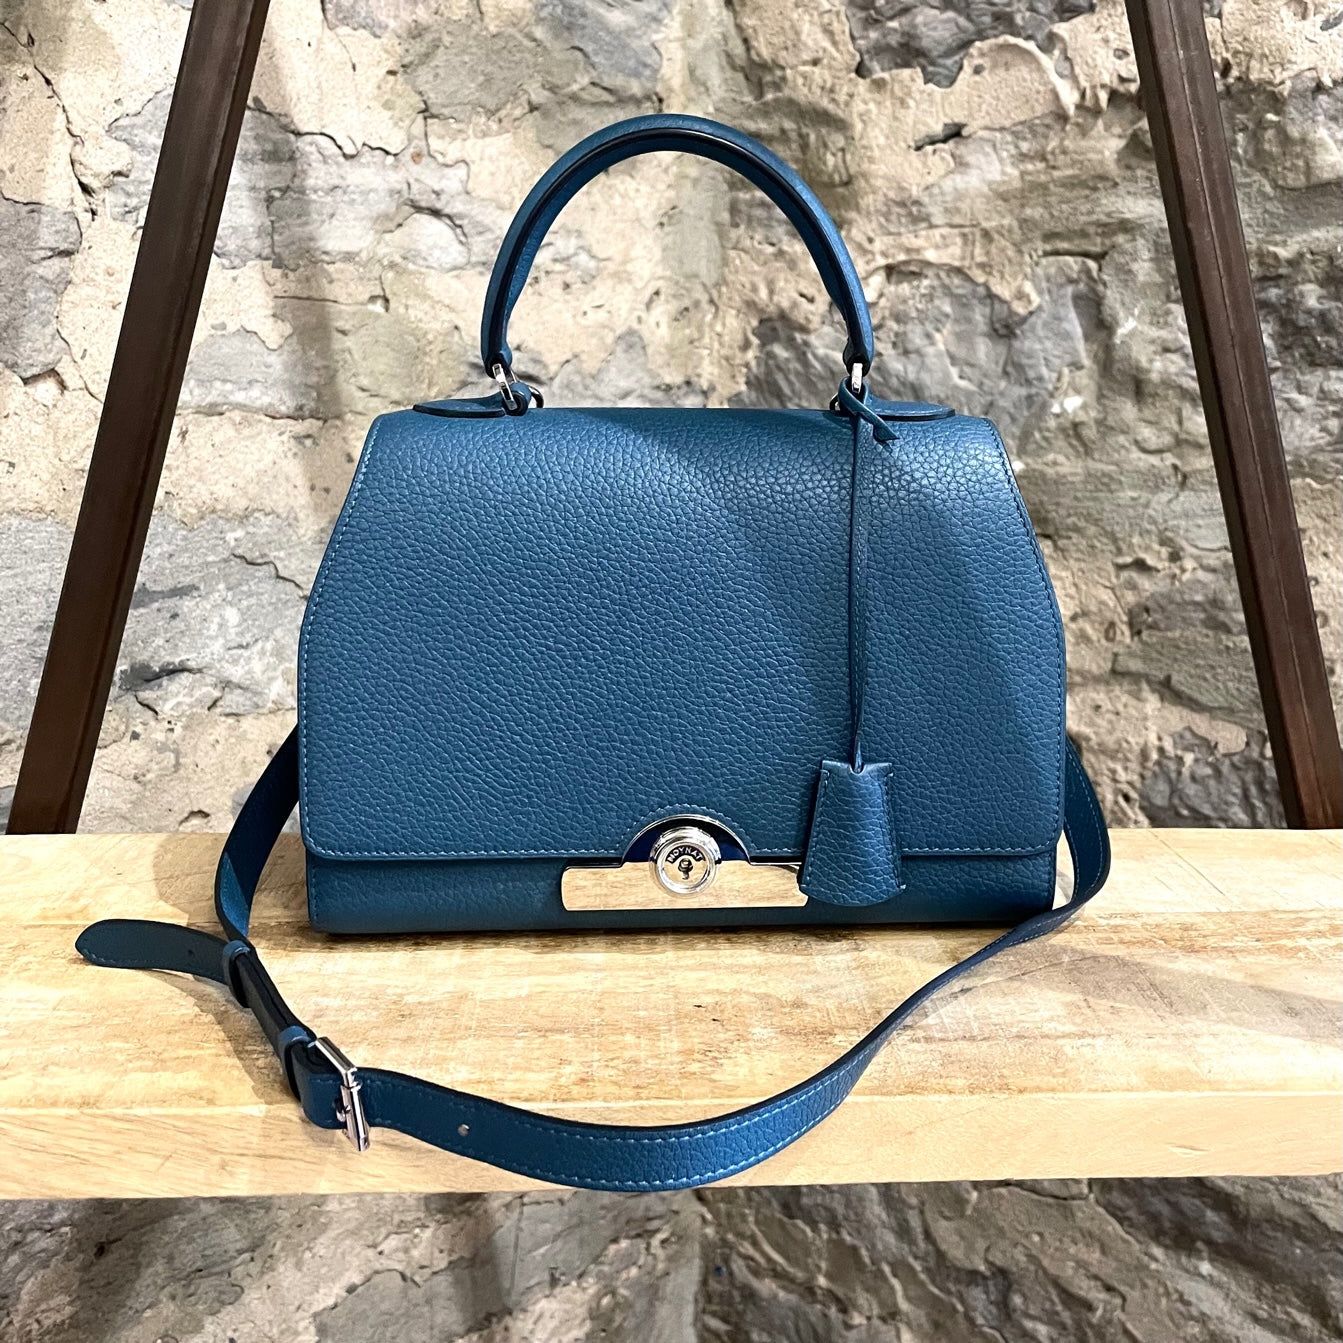 Moynat Rejane: Structured city bag in Taurillon Gex leather. Perle